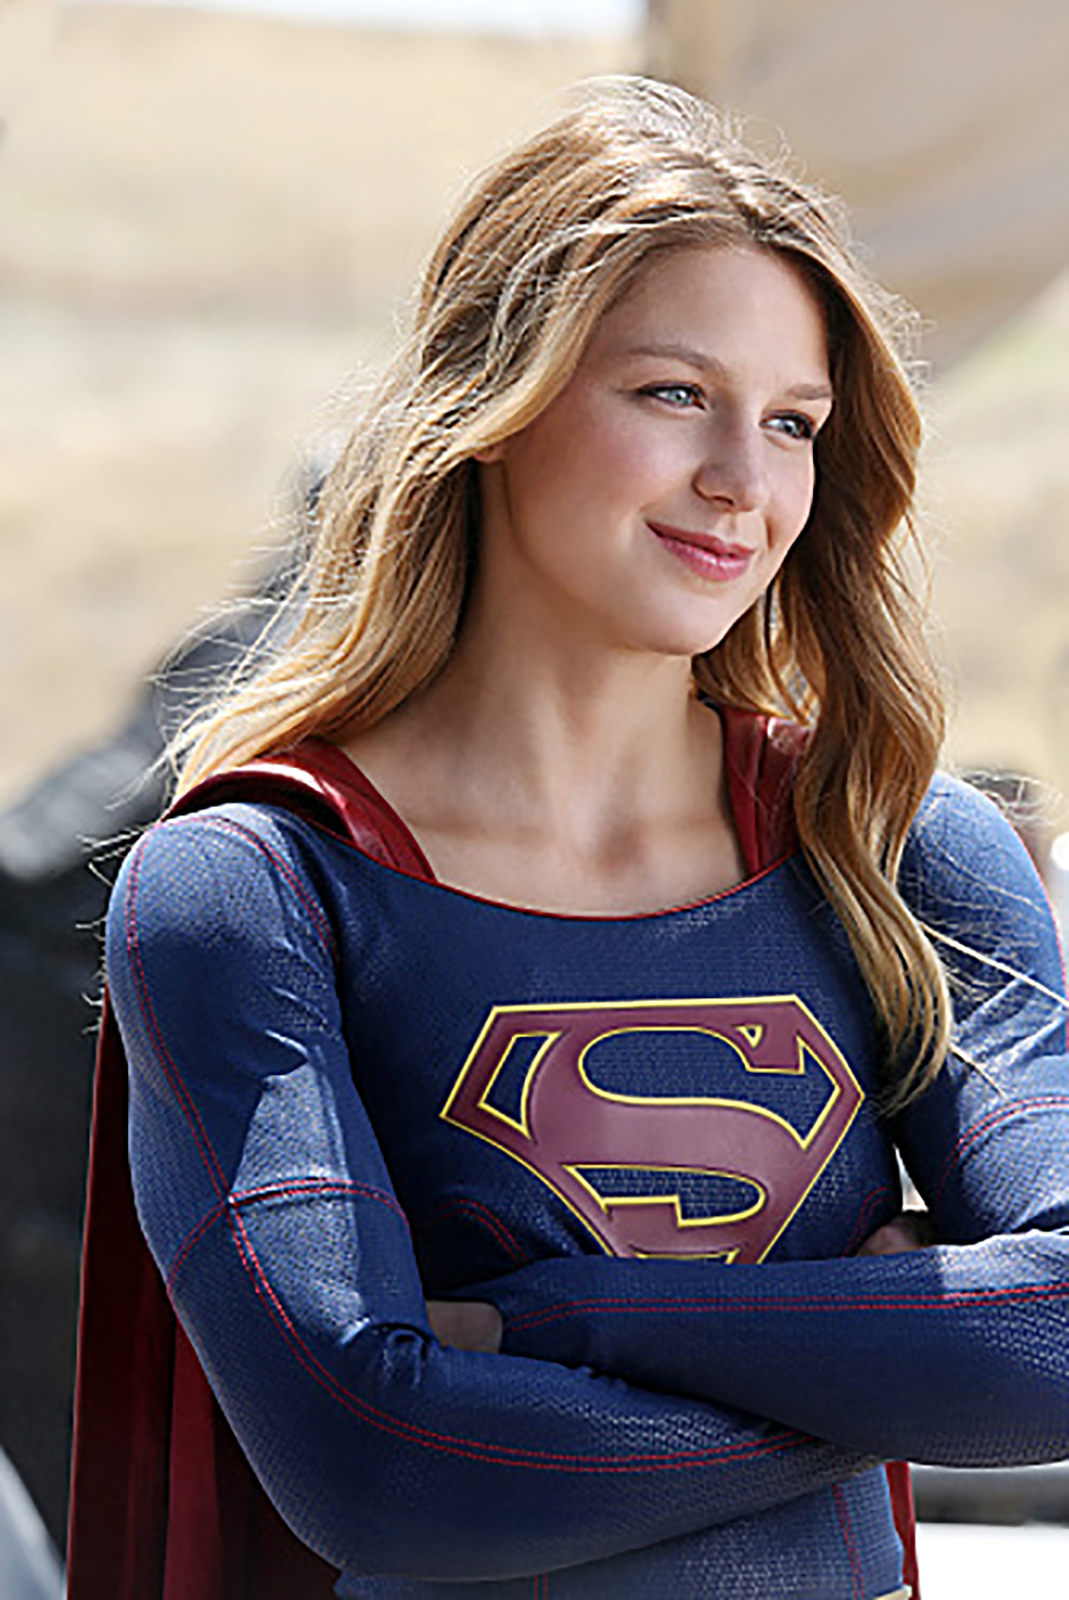 REVIEW: Supergirl presents new hero same stereotypes The Daily